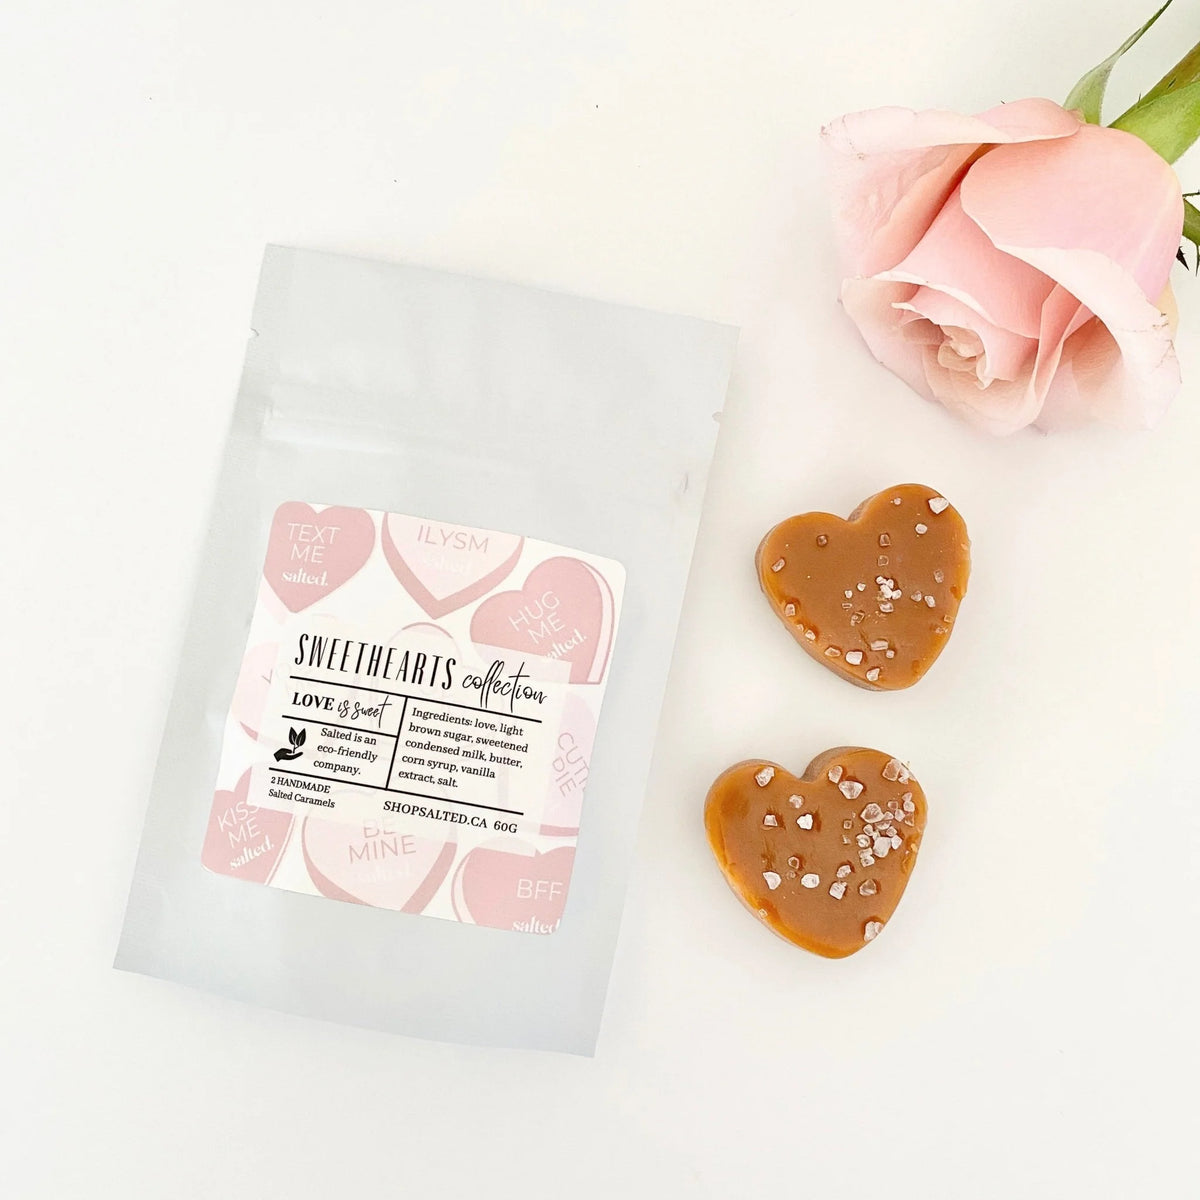 Sweethearts (2 pc) Salted Caramels